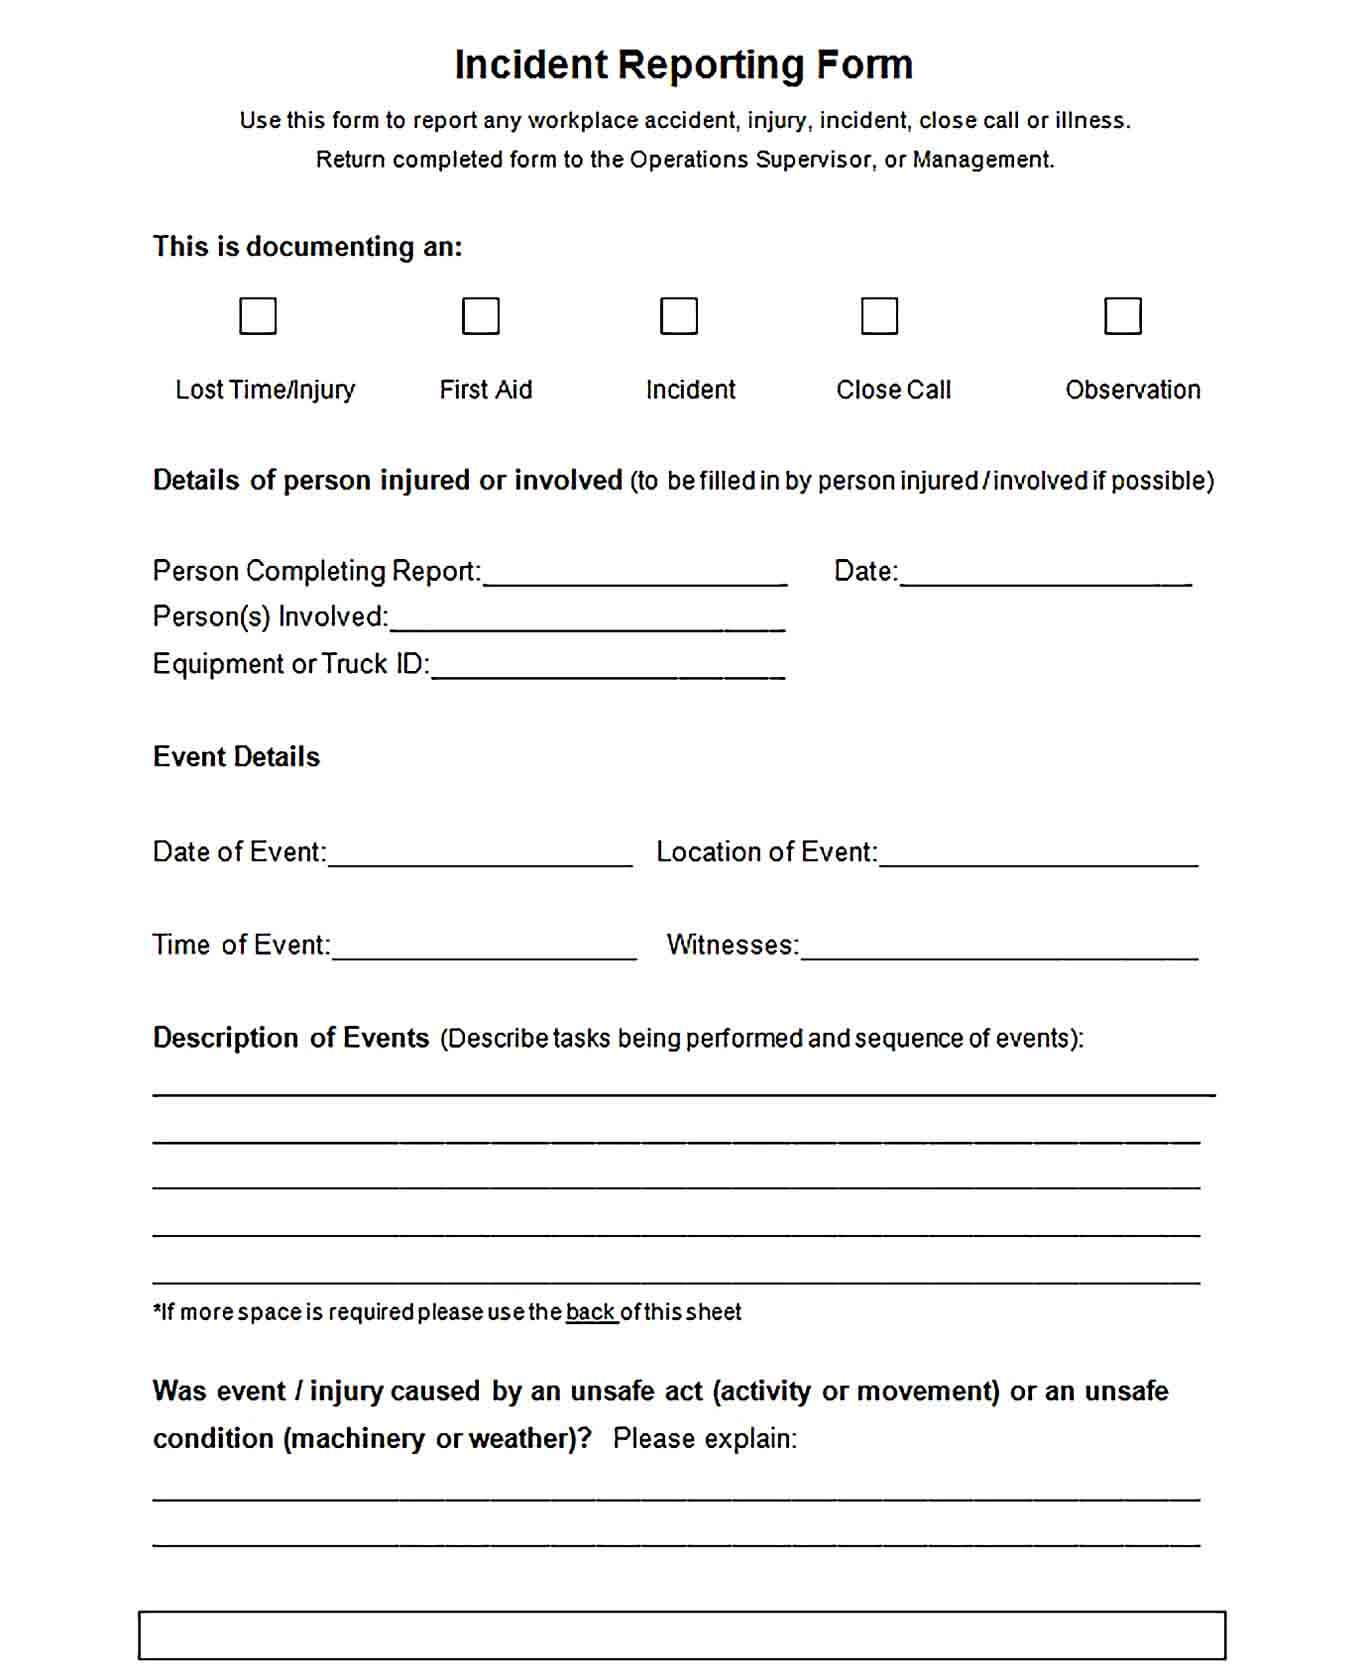 Sample Blank Employee Incident Reporting Form